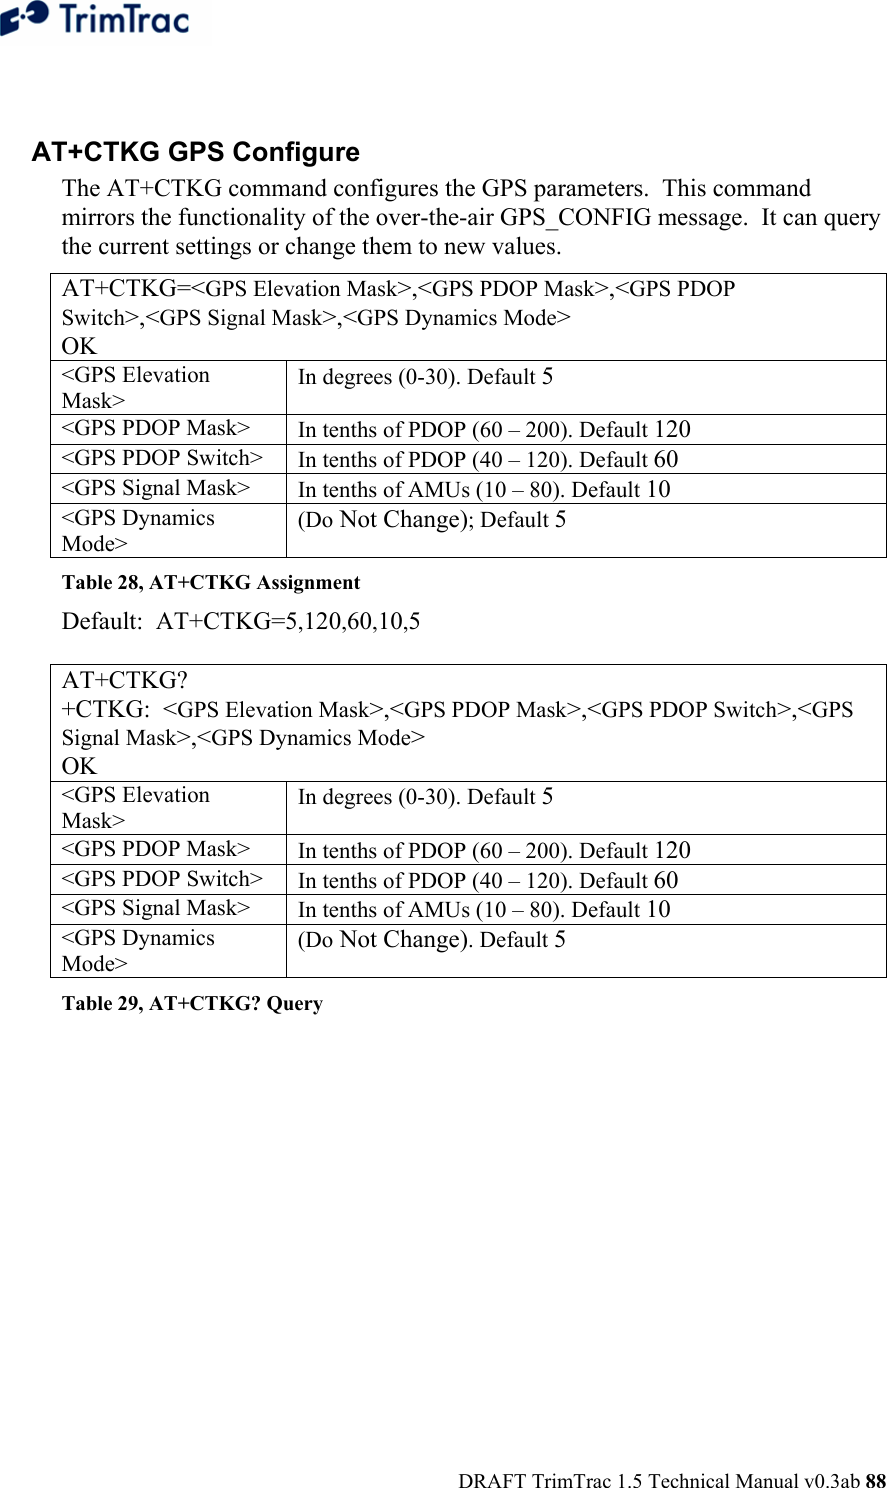  DRAFT TrimTrac 1.5 Technical Manual v0.3ab 88  AT+CTKG GPS Configure  The AT+CTKG command configures the GPS parameters.  This command mirrors the functionality of the over-the-air GPS_CONFIG message.  It can query the current settings or change them to new values. AT+CTKG=&lt;GPS Elevation Mask&gt;,&lt;GPS PDOP Mask&gt;,&lt;GPS PDOP Switch&gt;,&lt;GPS Signal Mask&gt;,&lt;GPS Dynamics Mode&gt; OK &lt;GPS Elevation Mask&gt; In degrees (0-30). Default 5 &lt;GPS PDOP Mask&gt;  In tenths of PDOP (60 – 200). Default 120 &lt;GPS PDOP Switch&gt;  In tenths of PDOP (40 – 120). Default 60 &lt;GPS Signal Mask&gt;  In tenths of AMUs (10 – 80). Default 10 &lt;GPS Dynamics Mode&gt; (Do Not Change); Default 5  Table 28, AT+CTKG Assignment Default:  AT+CTKG=5,120,60,10,5  AT+CTKG? +CTKG:  &lt;GPS Elevation Mask&gt;,&lt;GPS PDOP Mask&gt;,&lt;GPS PDOP Switch&gt;,&lt;GPS Signal Mask&gt;,&lt;GPS Dynamics Mode&gt; OK &lt;GPS Elevation Mask&gt; In degrees (0-30). Default 5 &lt;GPS PDOP Mask&gt;  In tenths of PDOP (60 – 200). Default 120 &lt;GPS PDOP Switch&gt;  In tenths of PDOP (40 – 120). Default 60 &lt;GPS Signal Mask&gt;  In tenths of AMUs (10 – 80). Default 10 &lt;GPS Dynamics Mode&gt; (Do Not Change). Default 5 Table 29, AT+CTKG? Query 